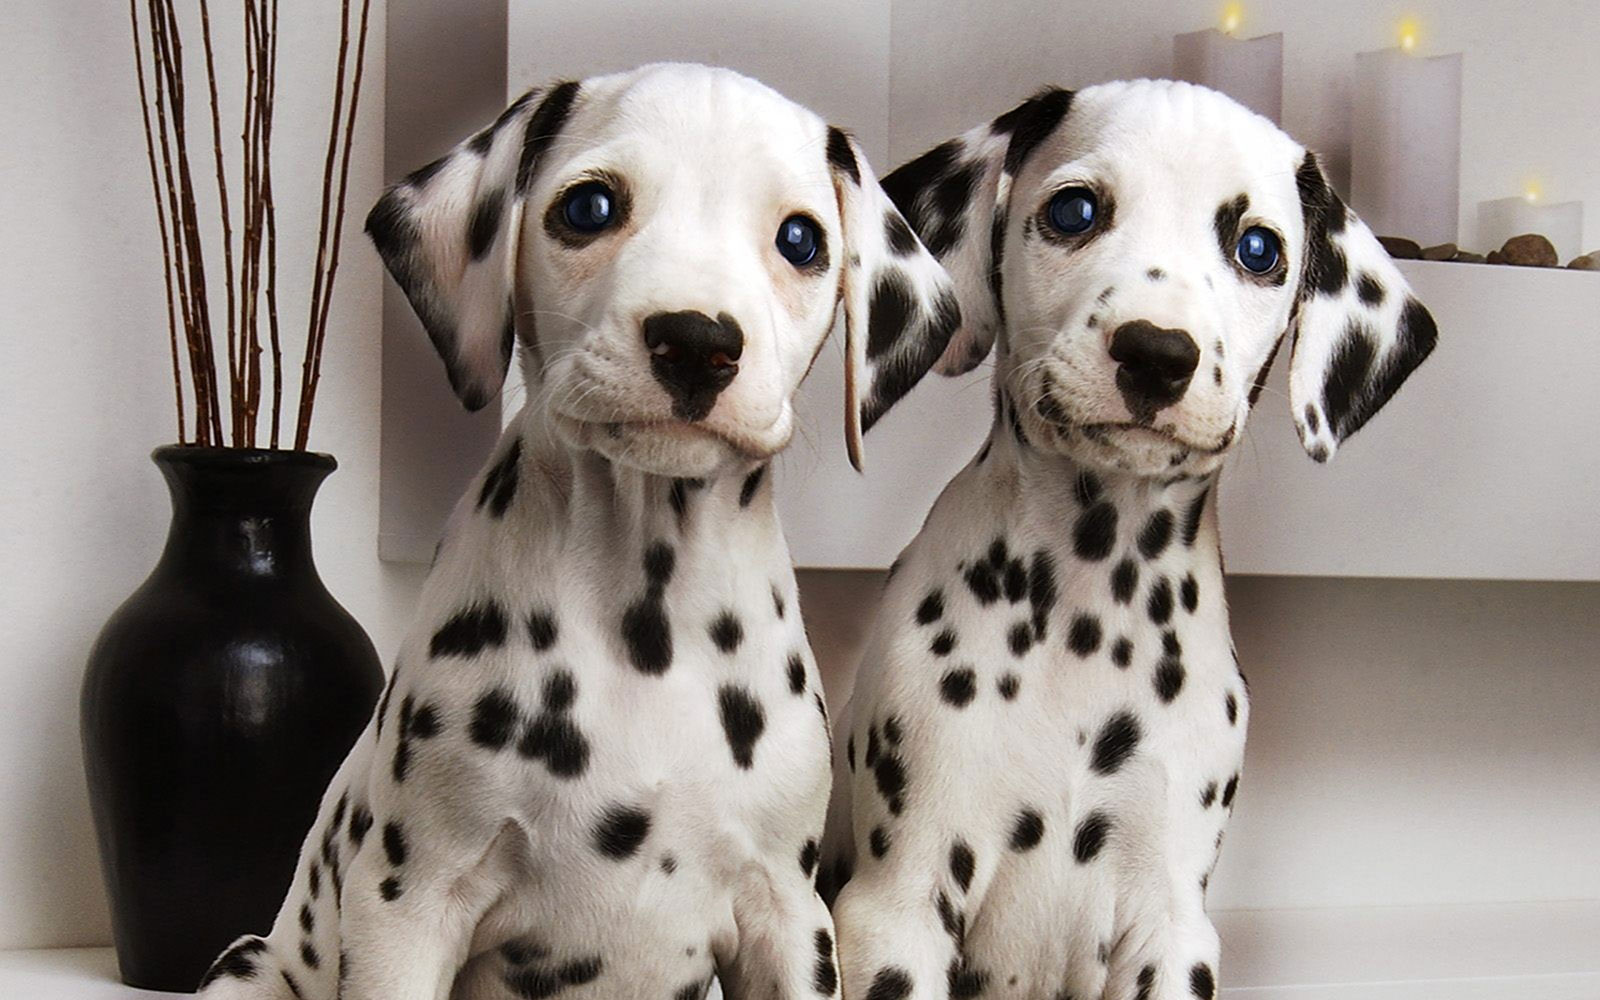 If You Want to Know the Number of 👶🏻 Kids You’ll Have, Choose Some 🐶 Dogs to Find Out Dalmatians